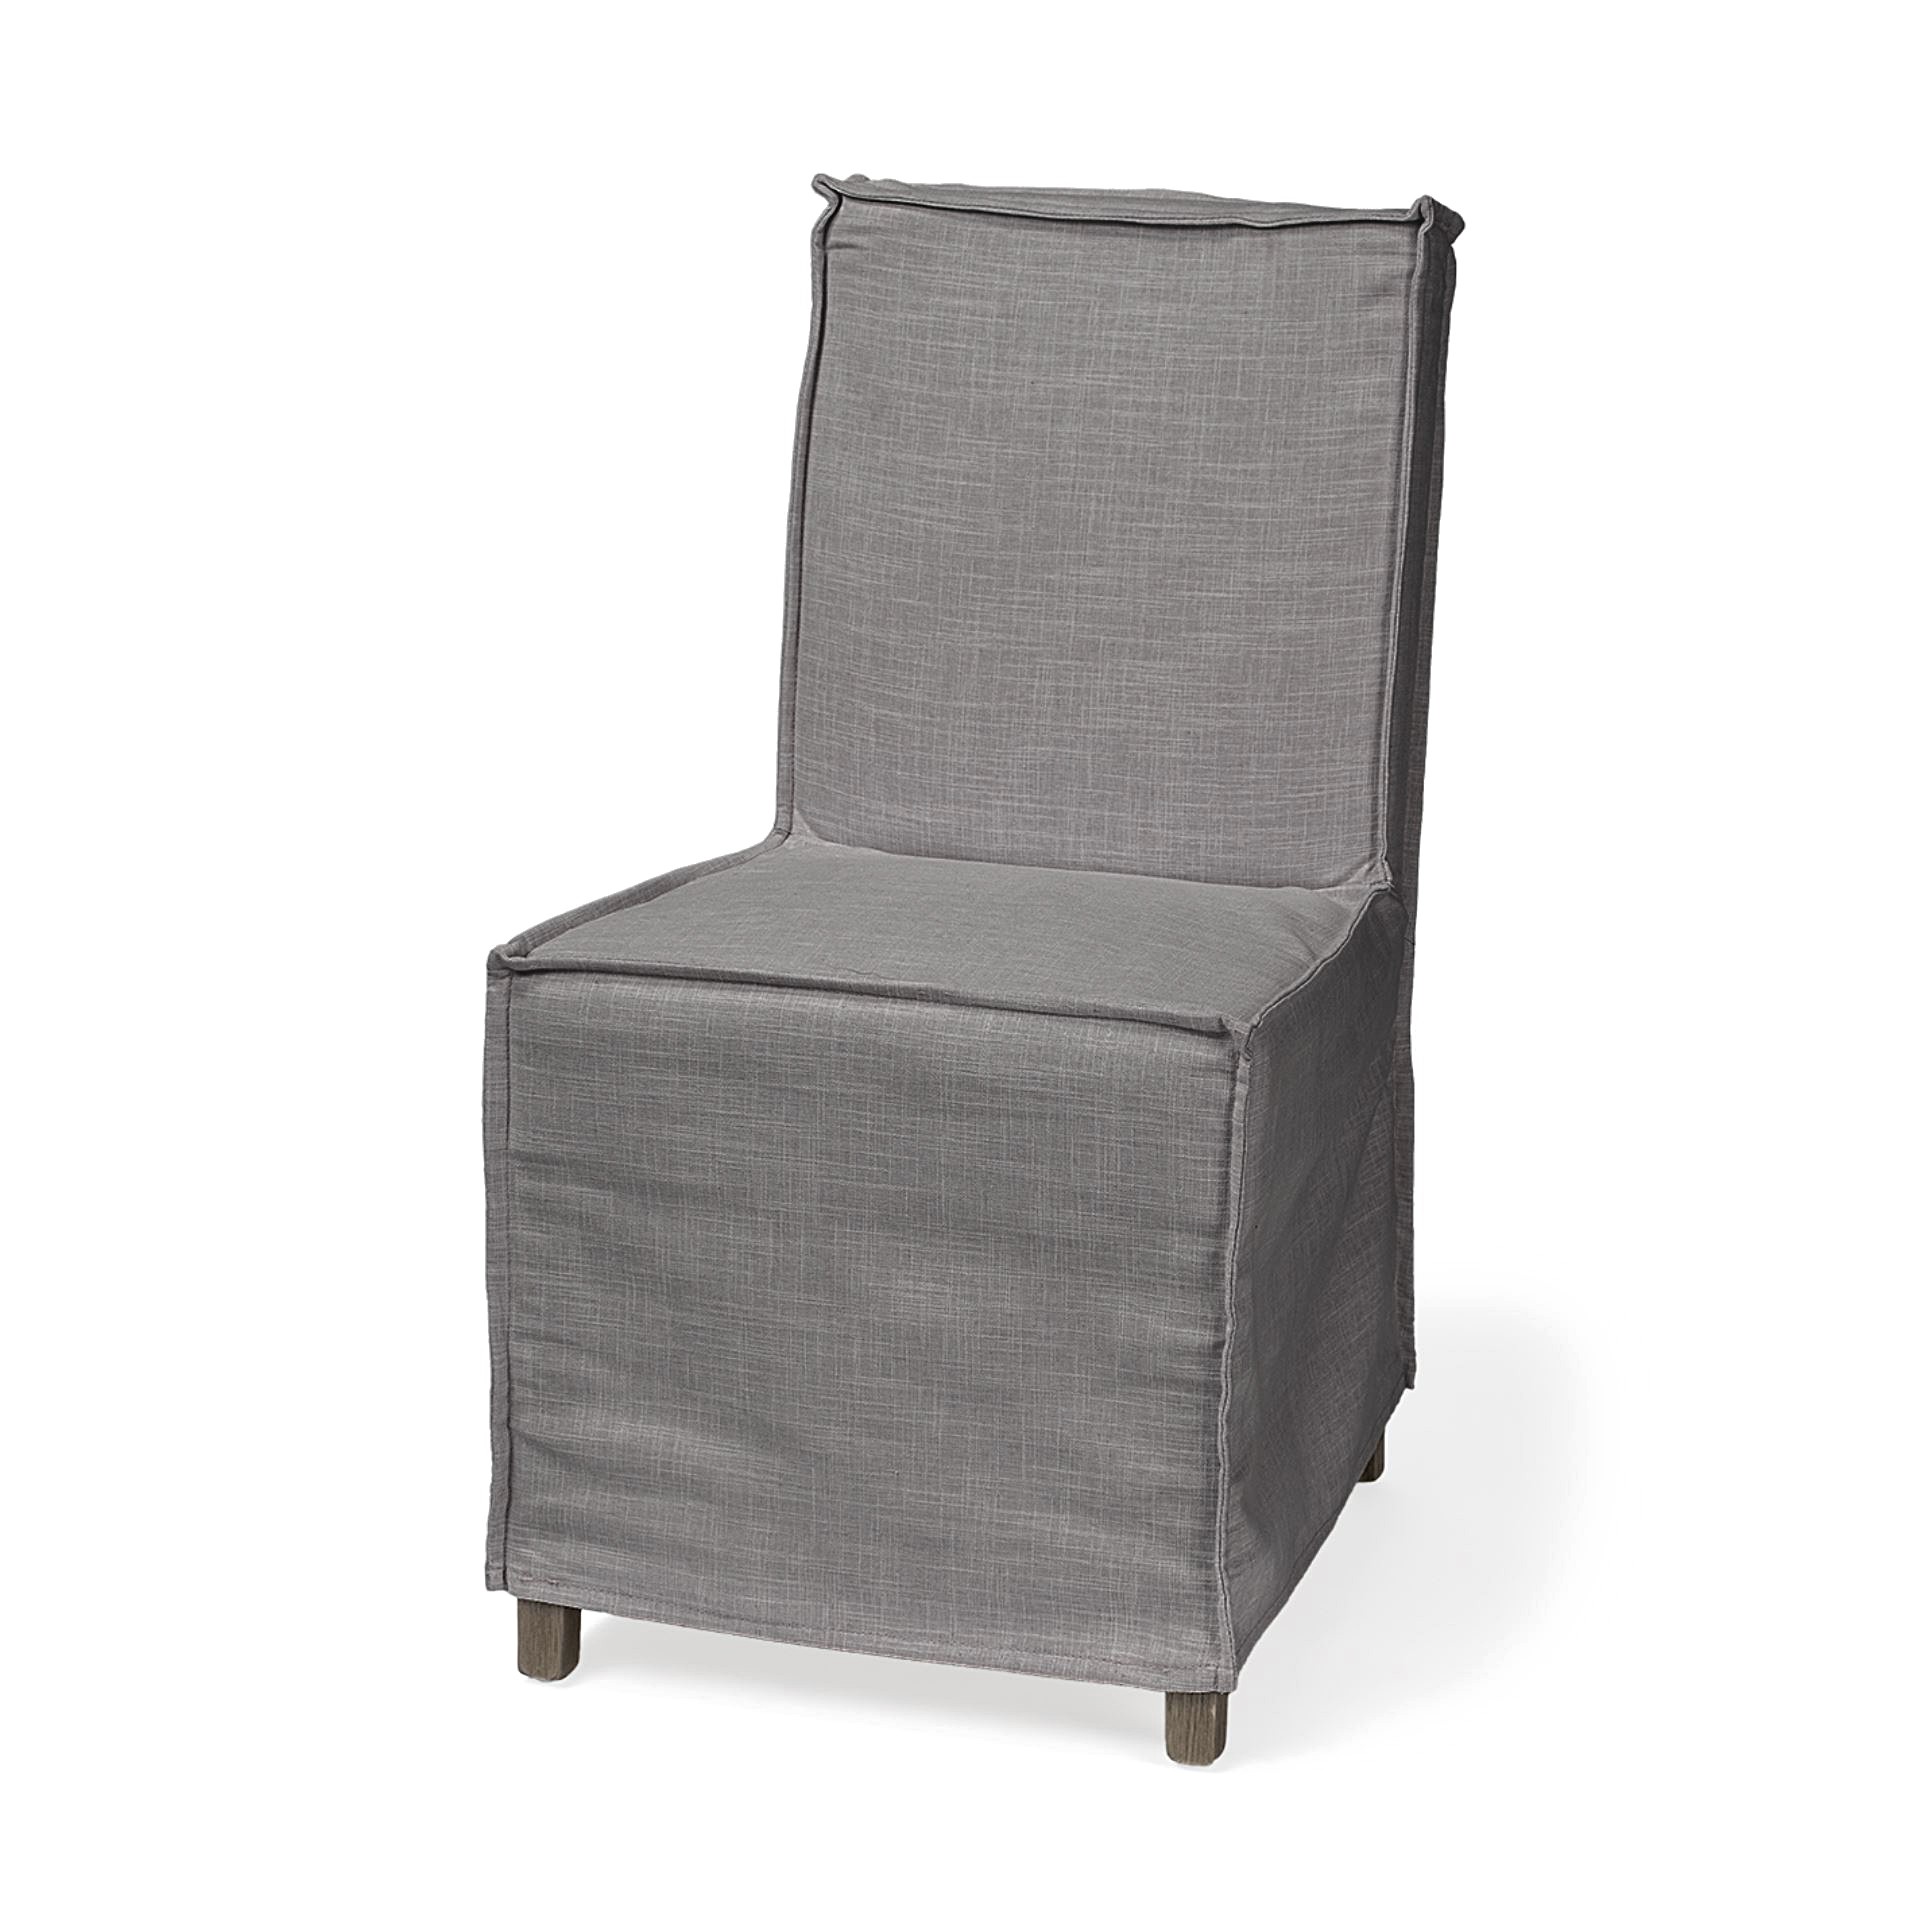 Grey Fabric Slip Cover with Brown Wooden Base Dining Chair